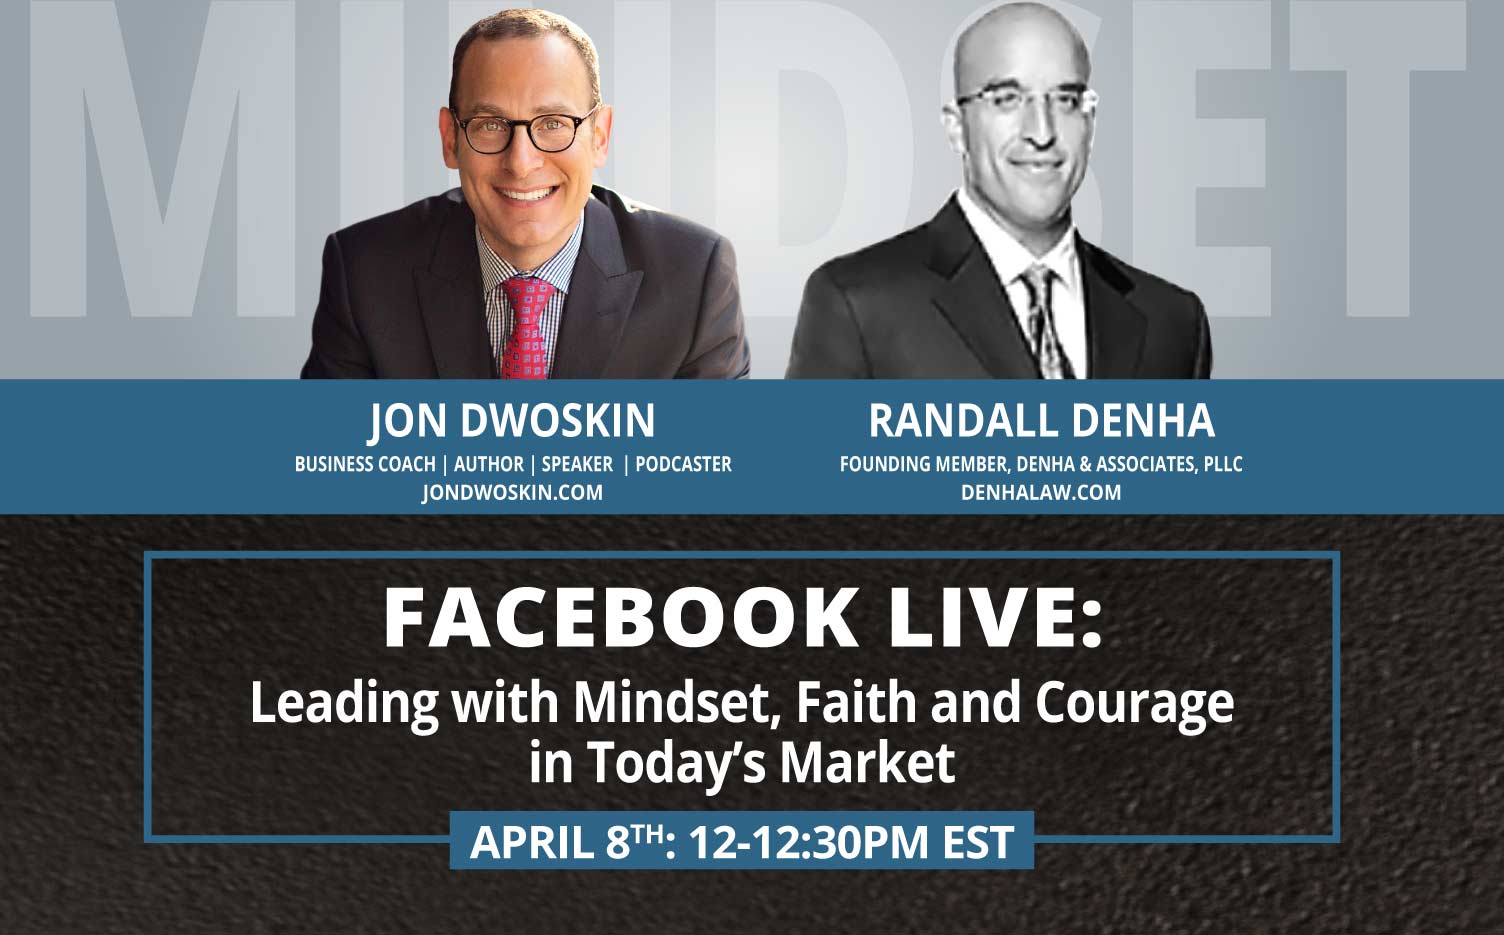 Jon Dwoskin and Randall Denha LIVE: Leading with Mindset, Faith and Courage in Today’s Market